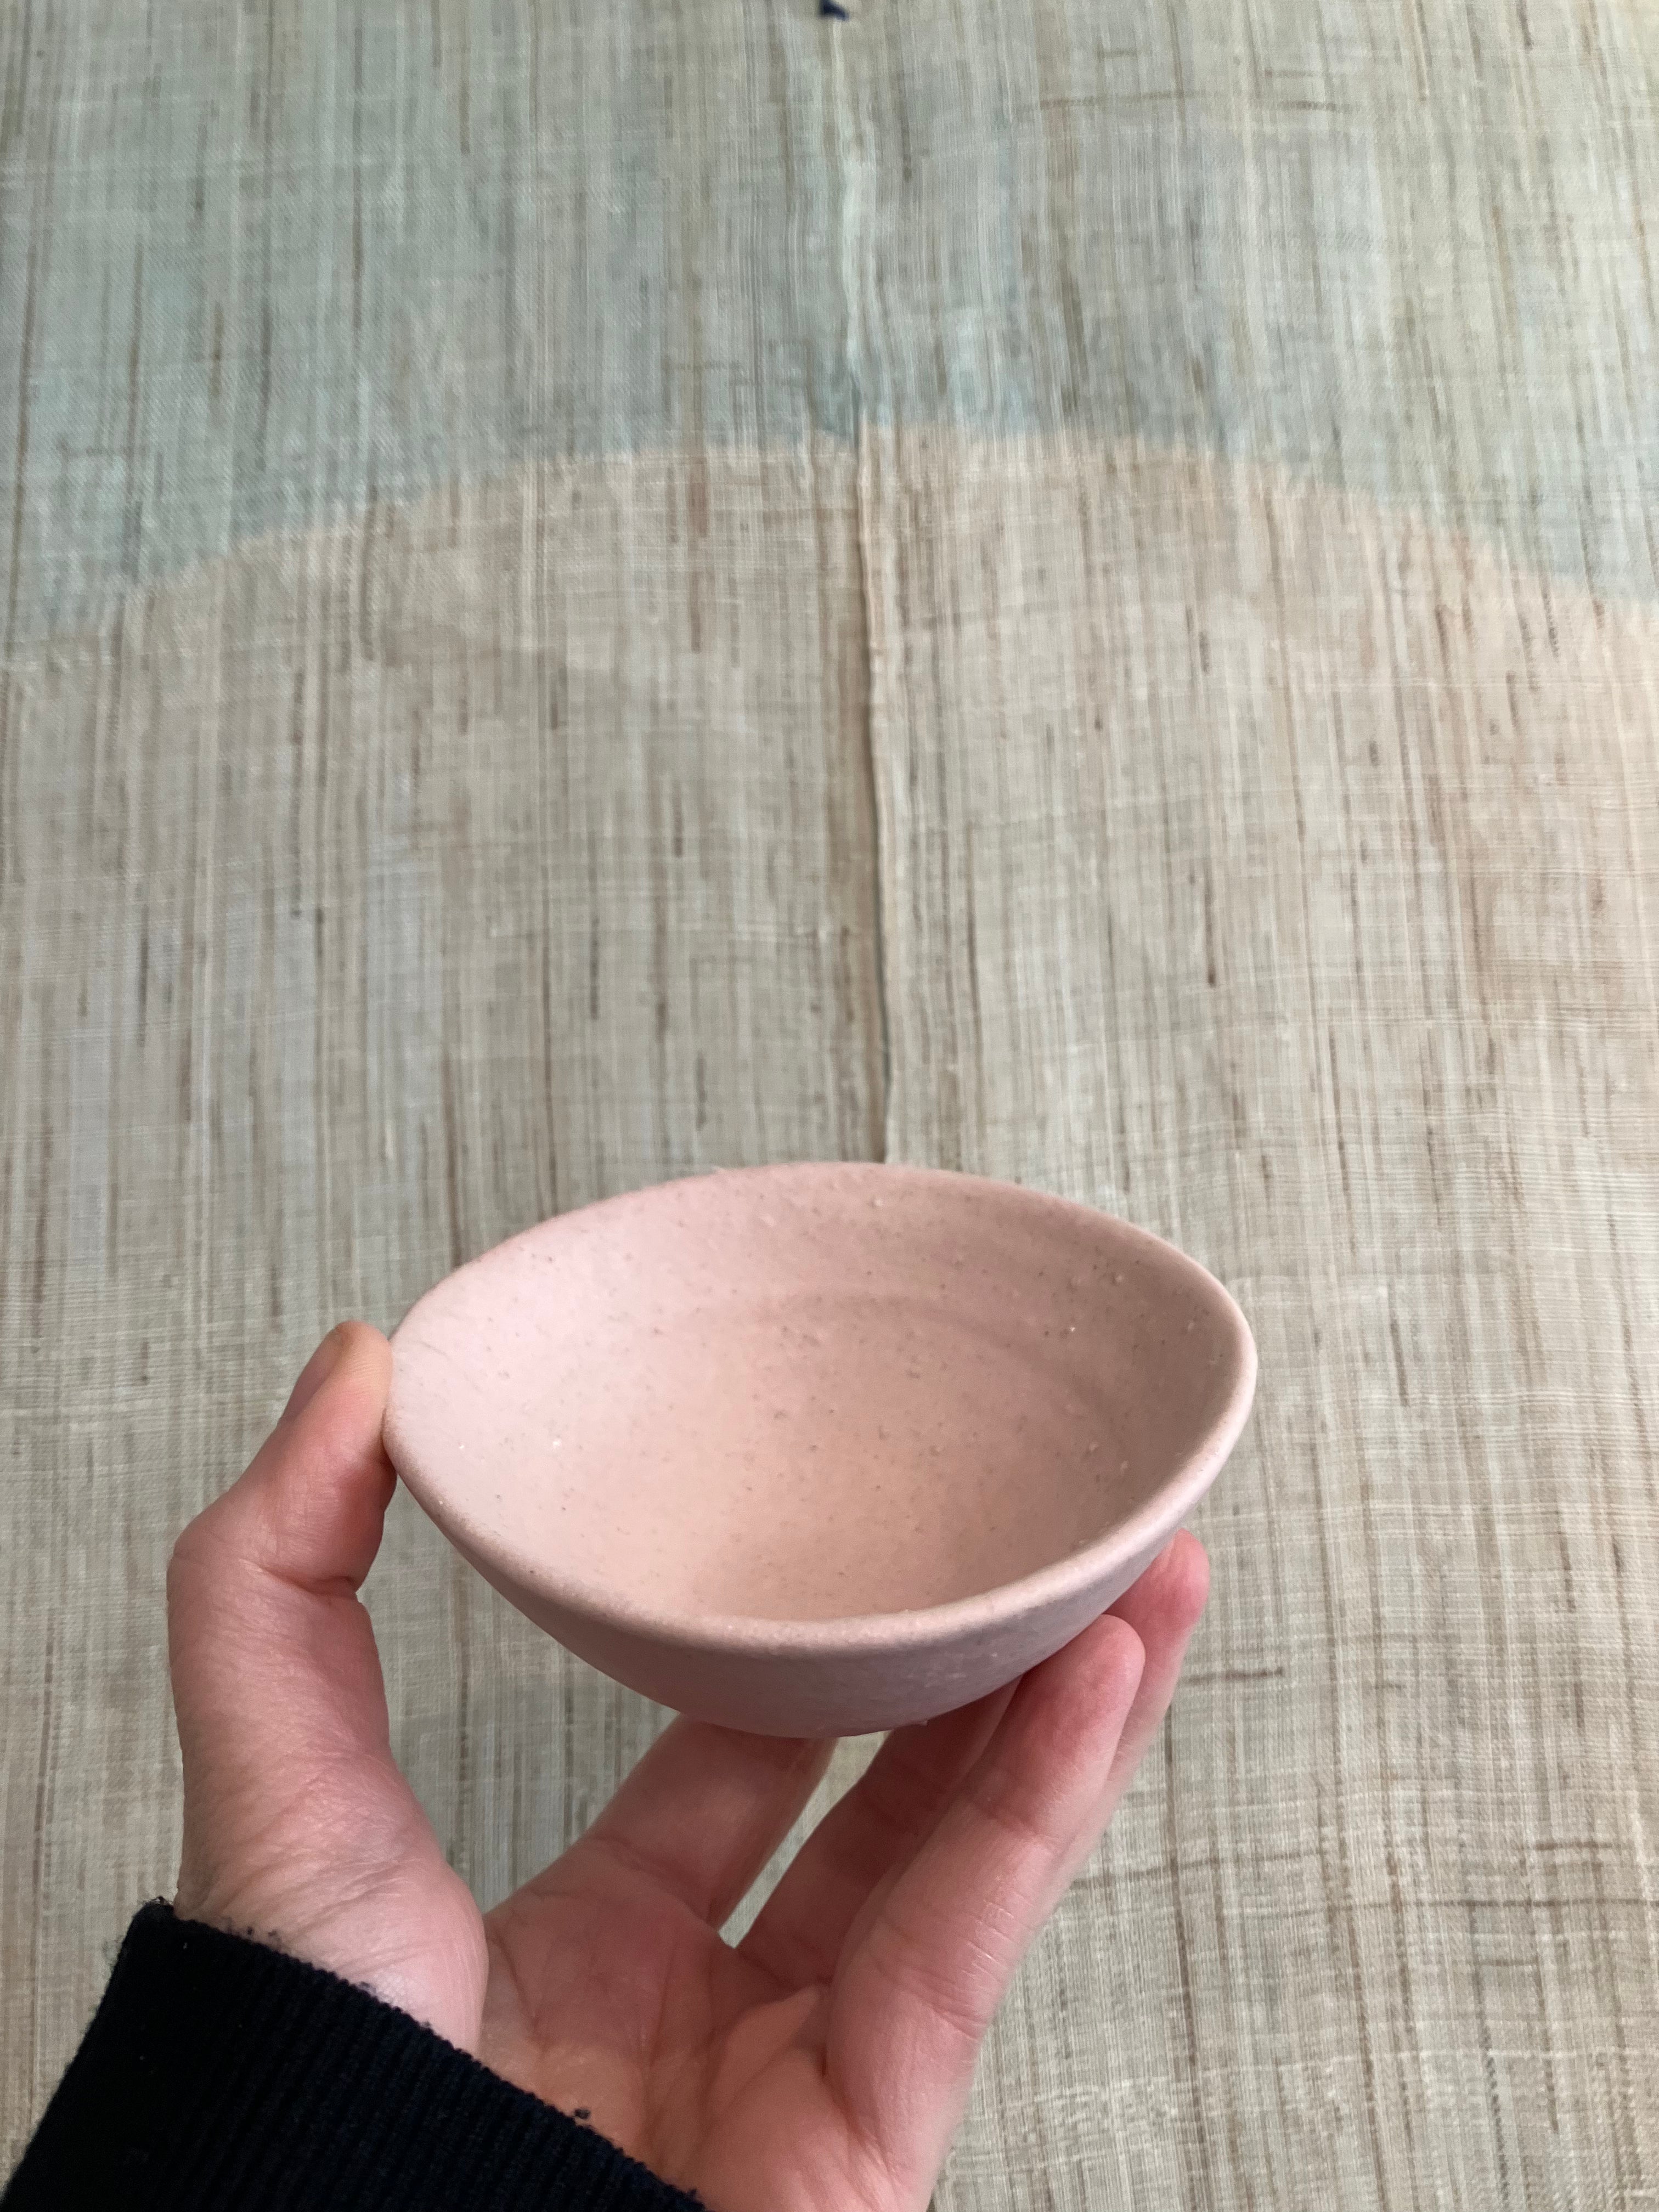 Small bowl with pink glaze and rustic texture